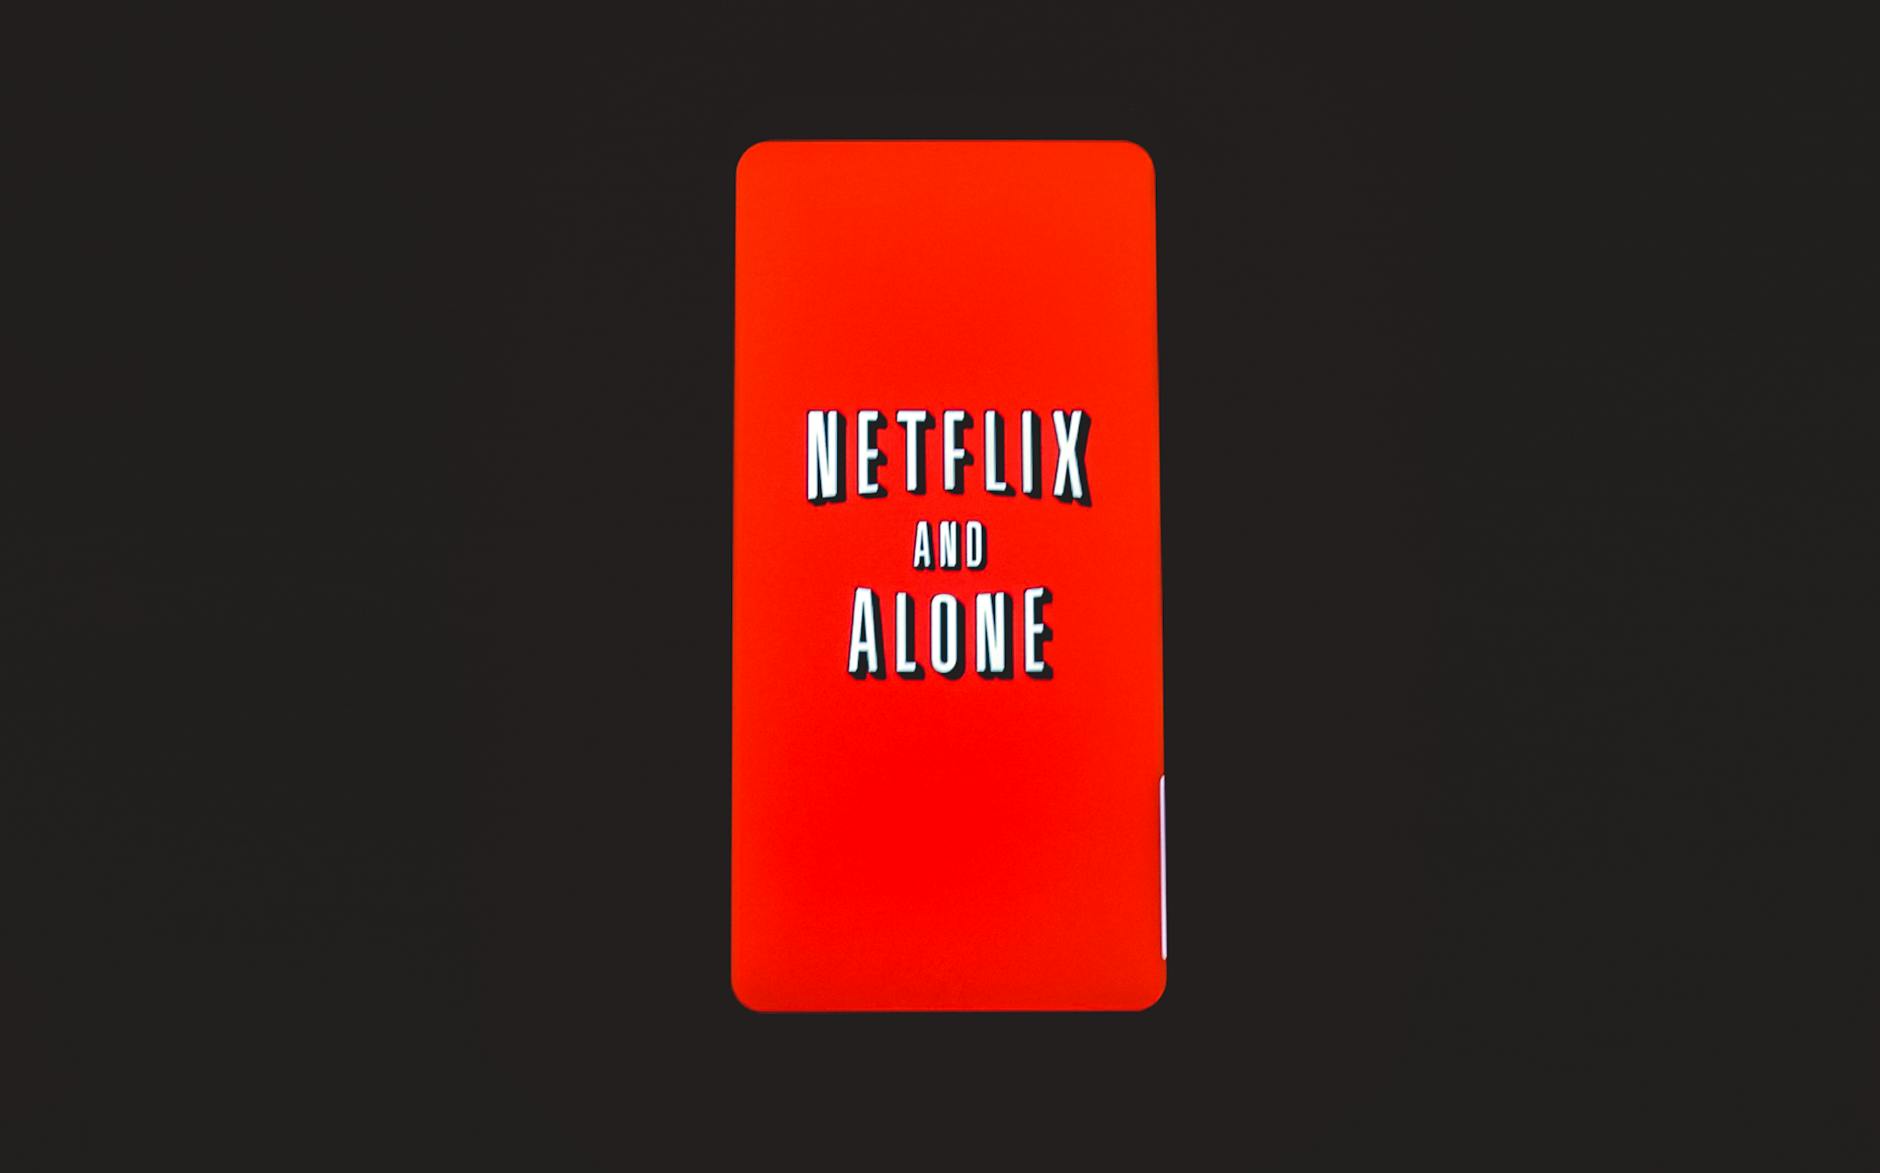 Netflix Quote on a Red Screen